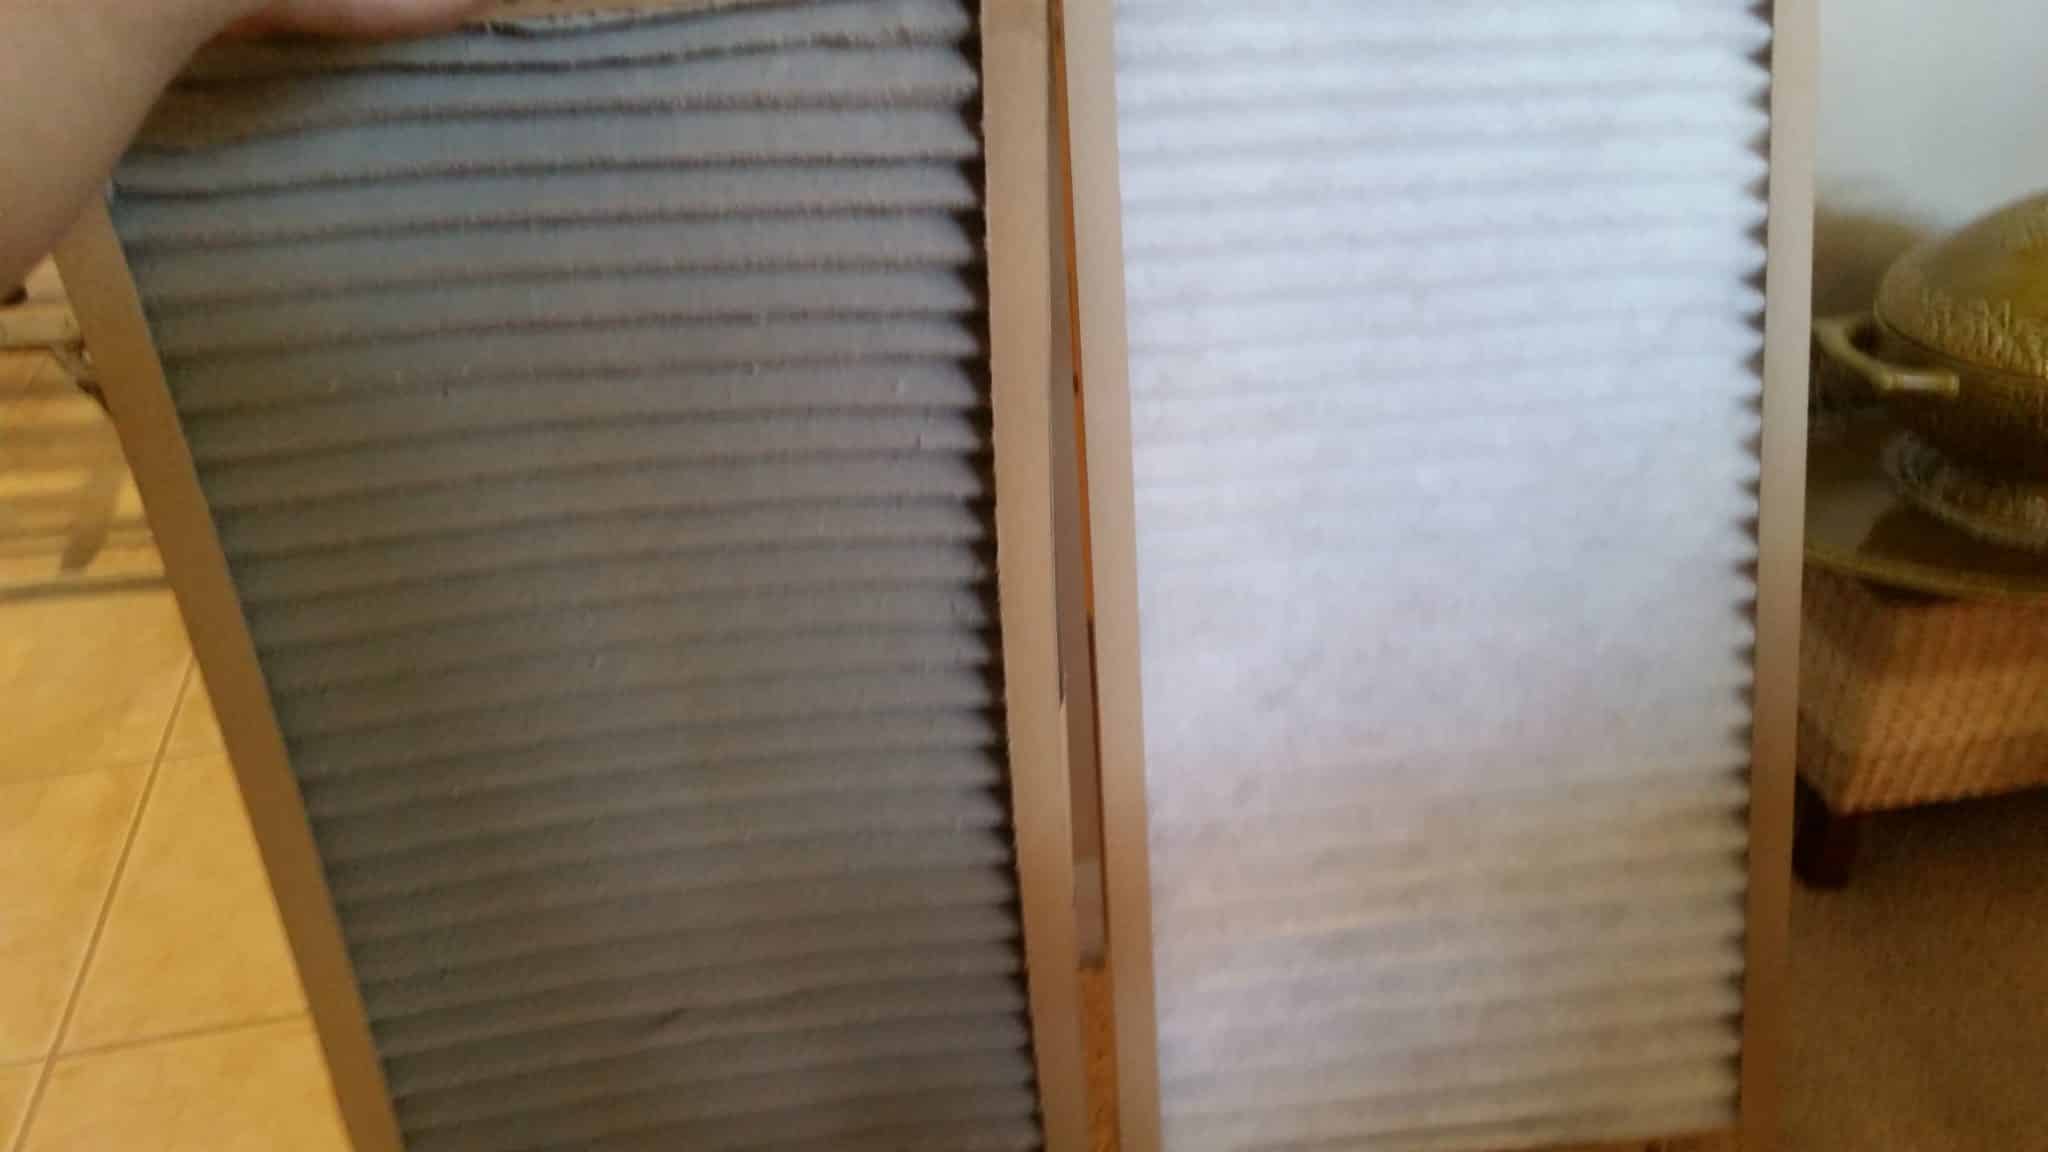 dirty ac filter vs. clean ac filter